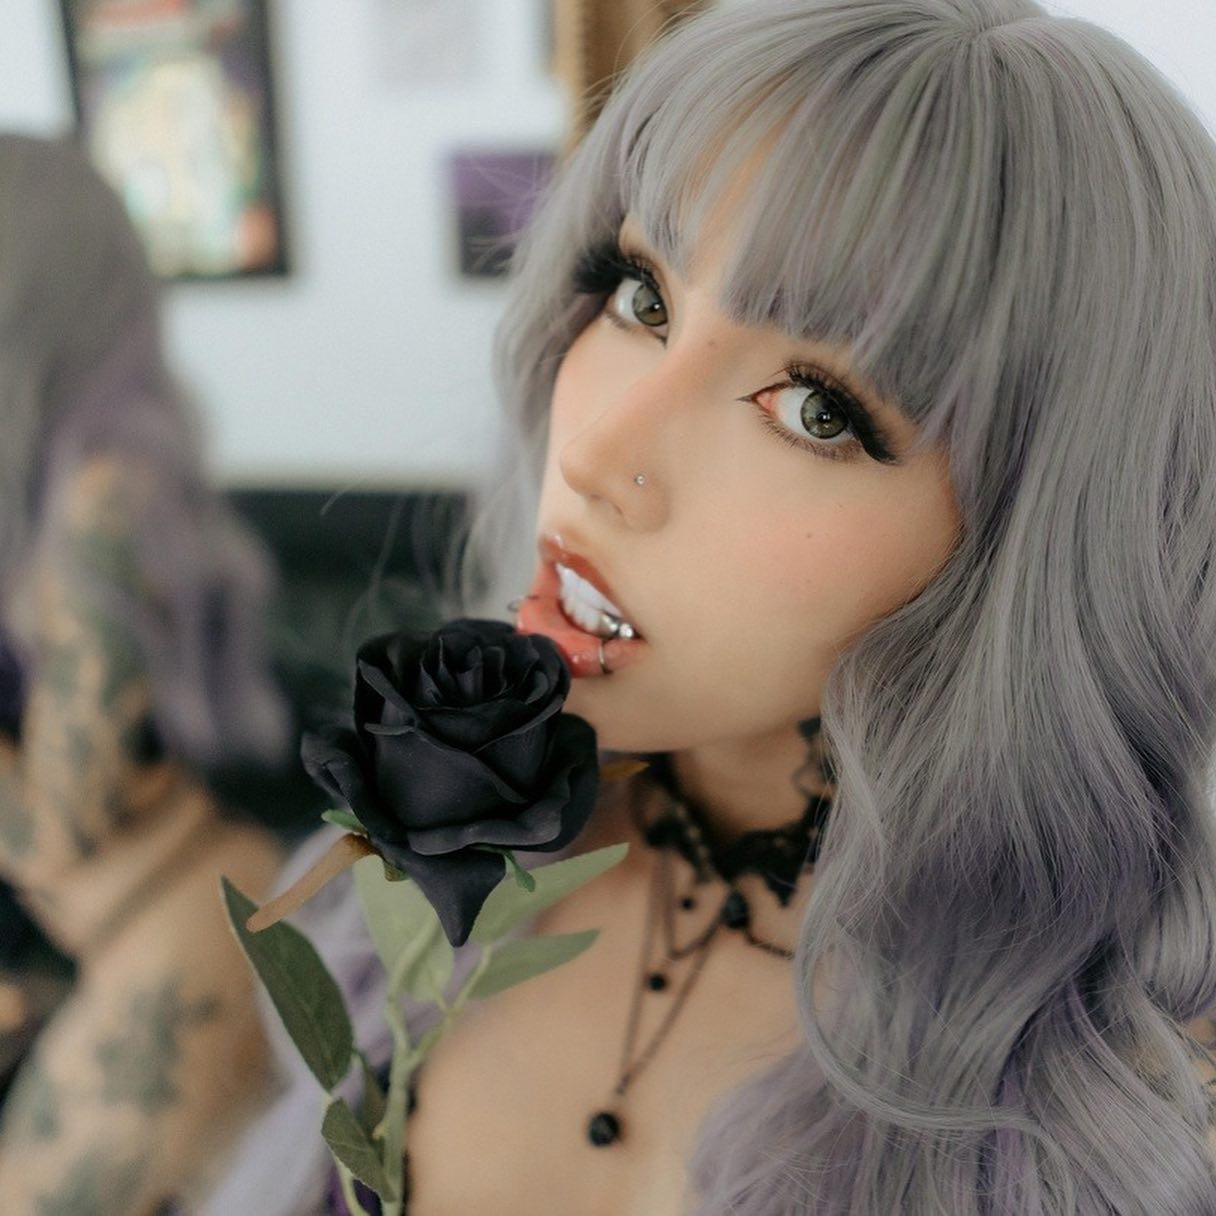 “Rosegarden Funeral of Sores” by Babu is now available on SuicideGirls.com 🧛🏻‍♀️🥀 show me some love on my new set!
.
.
.
.
.
.
.
.
#alt #alternative #altmodel #altgirl #gothgirl #tattoos #tattoomodel #tattoogirl #gothgirls